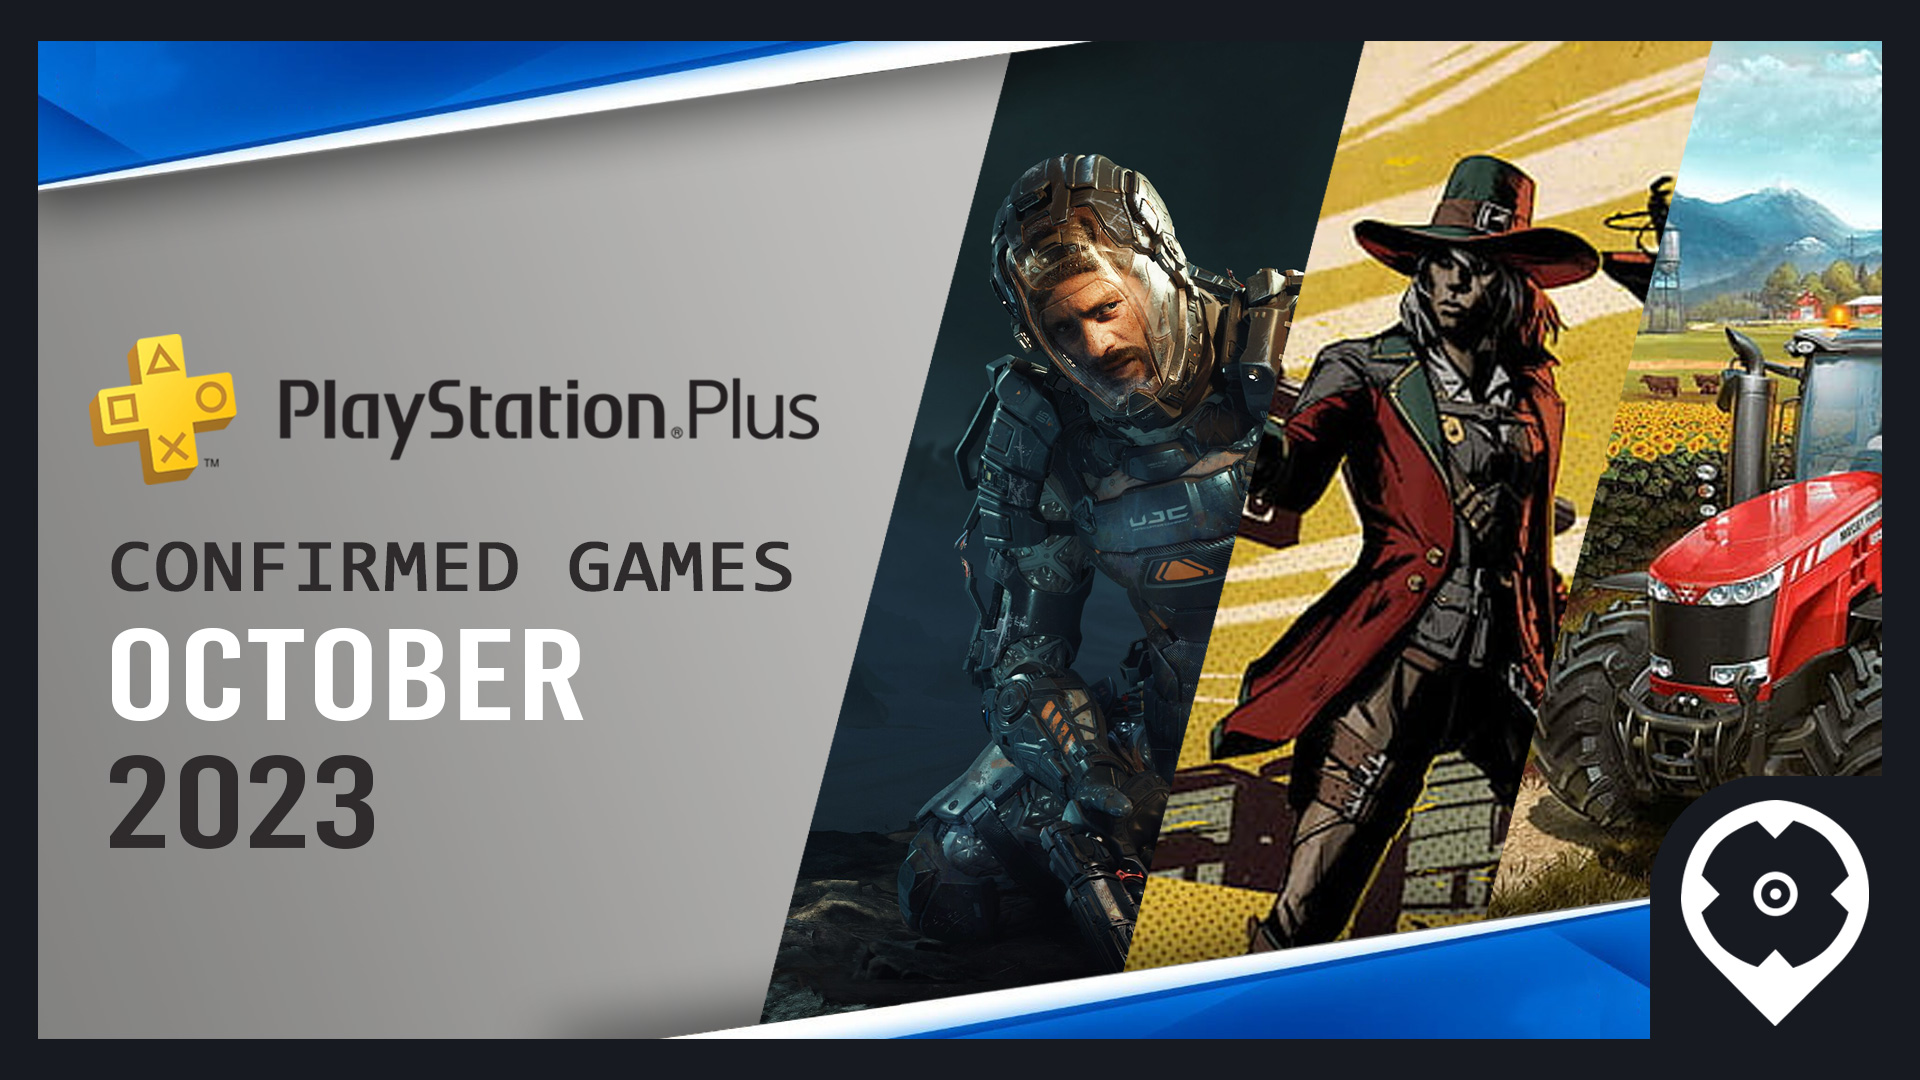 PlayStation Plus Free Games For October 2023 Revealed - GameSpot